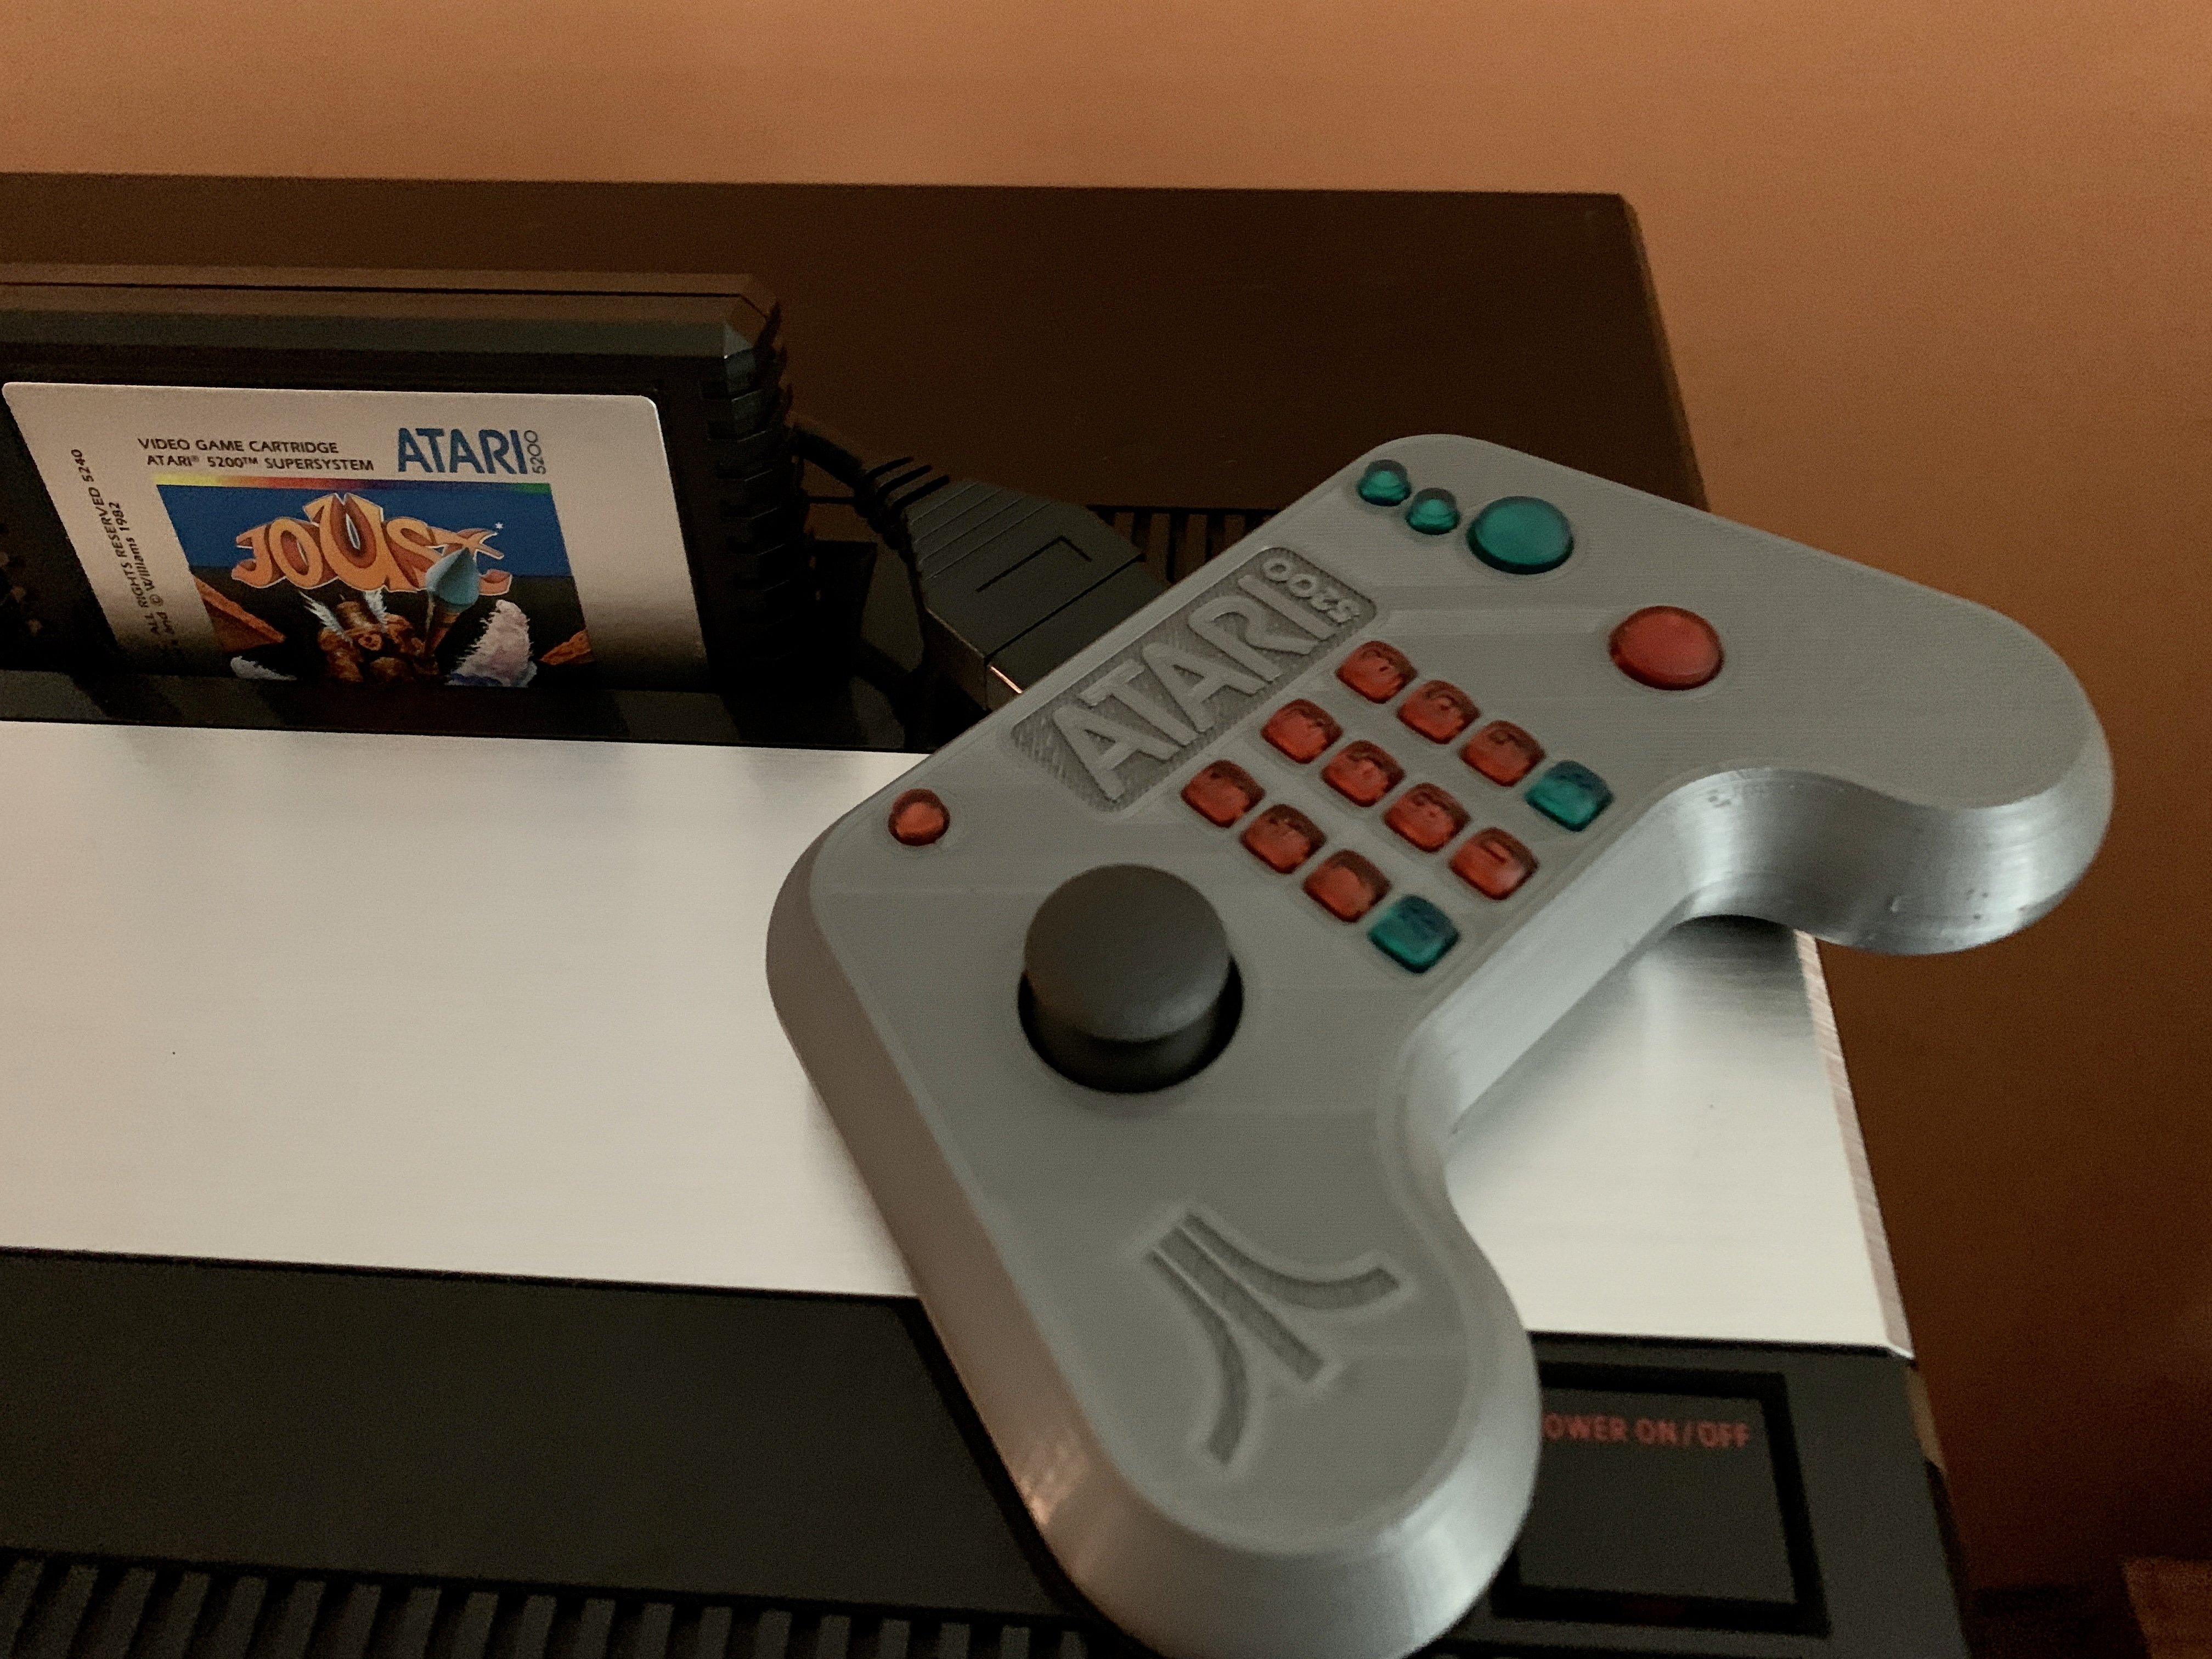 Finally, A New Atari 5200 Controller that Works!